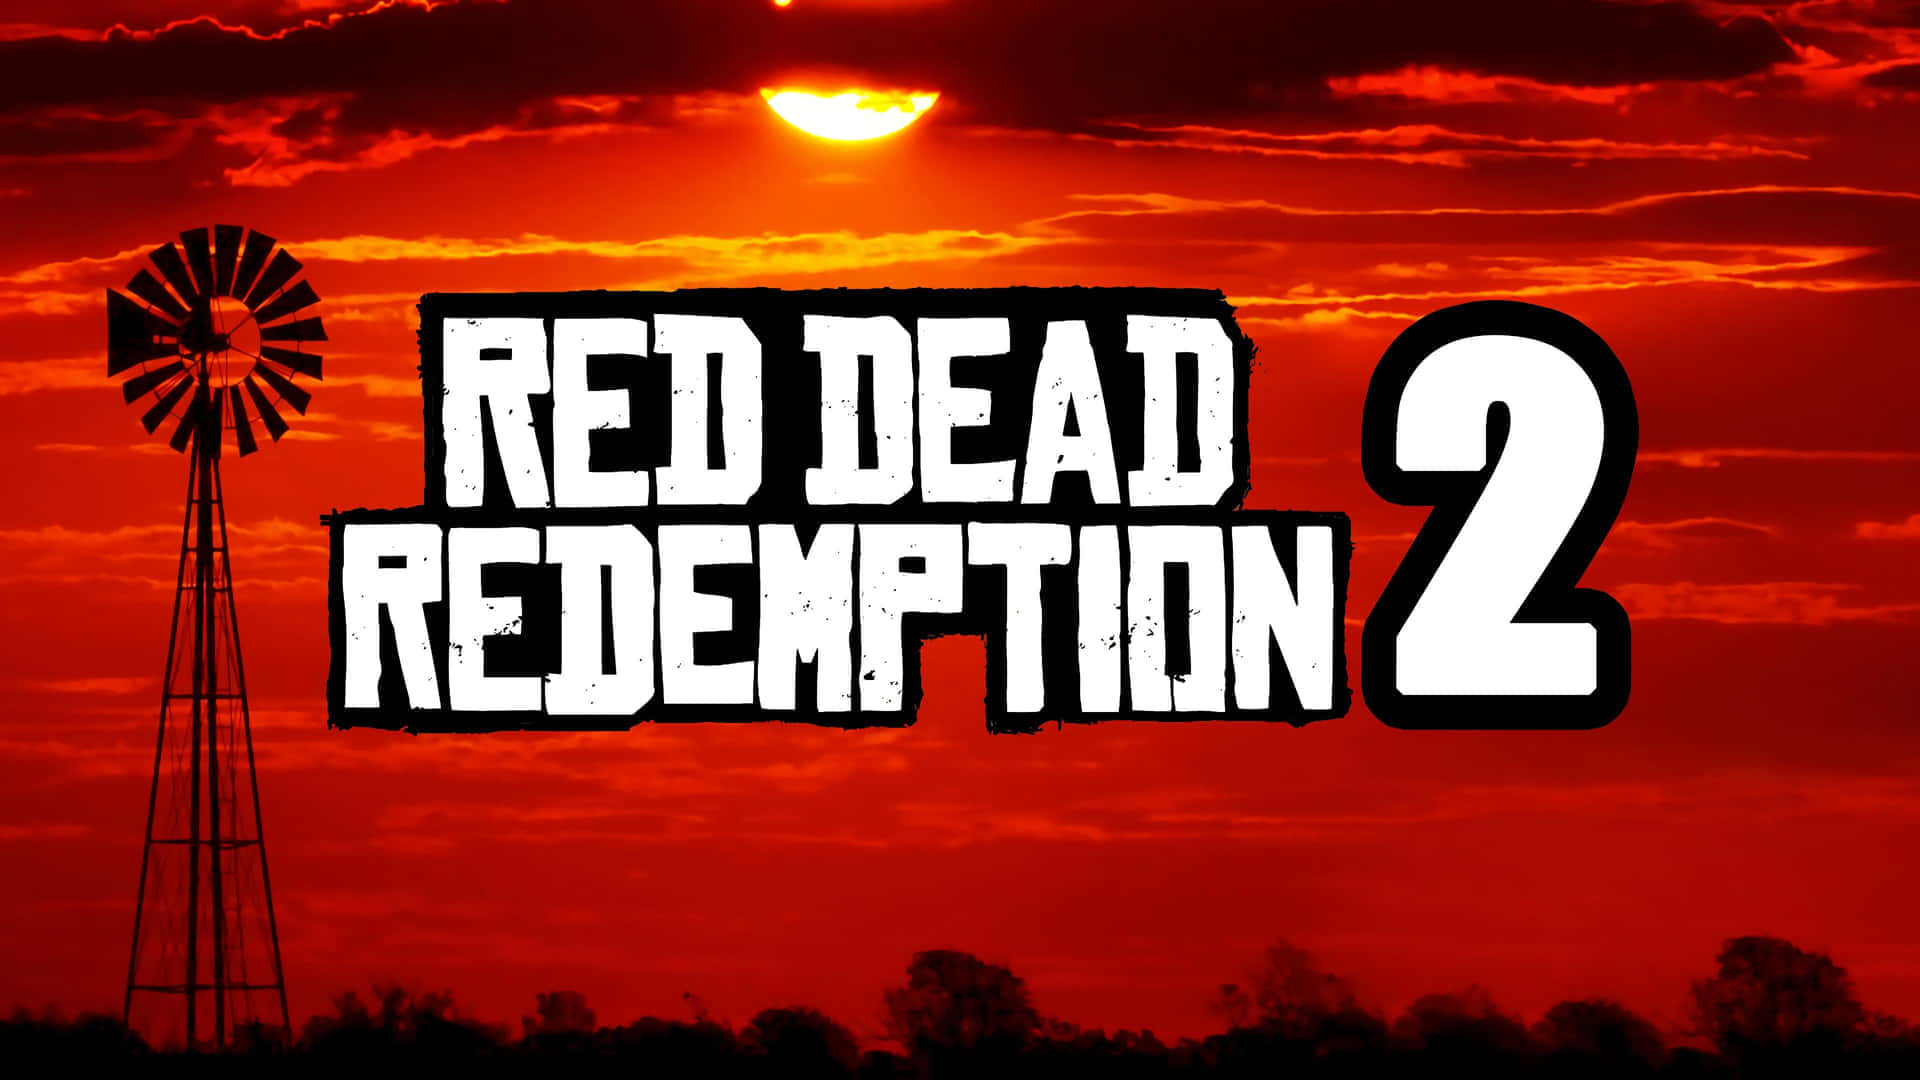 Image  Red Dead Redemption 2 - An Epic Adventure Awaits